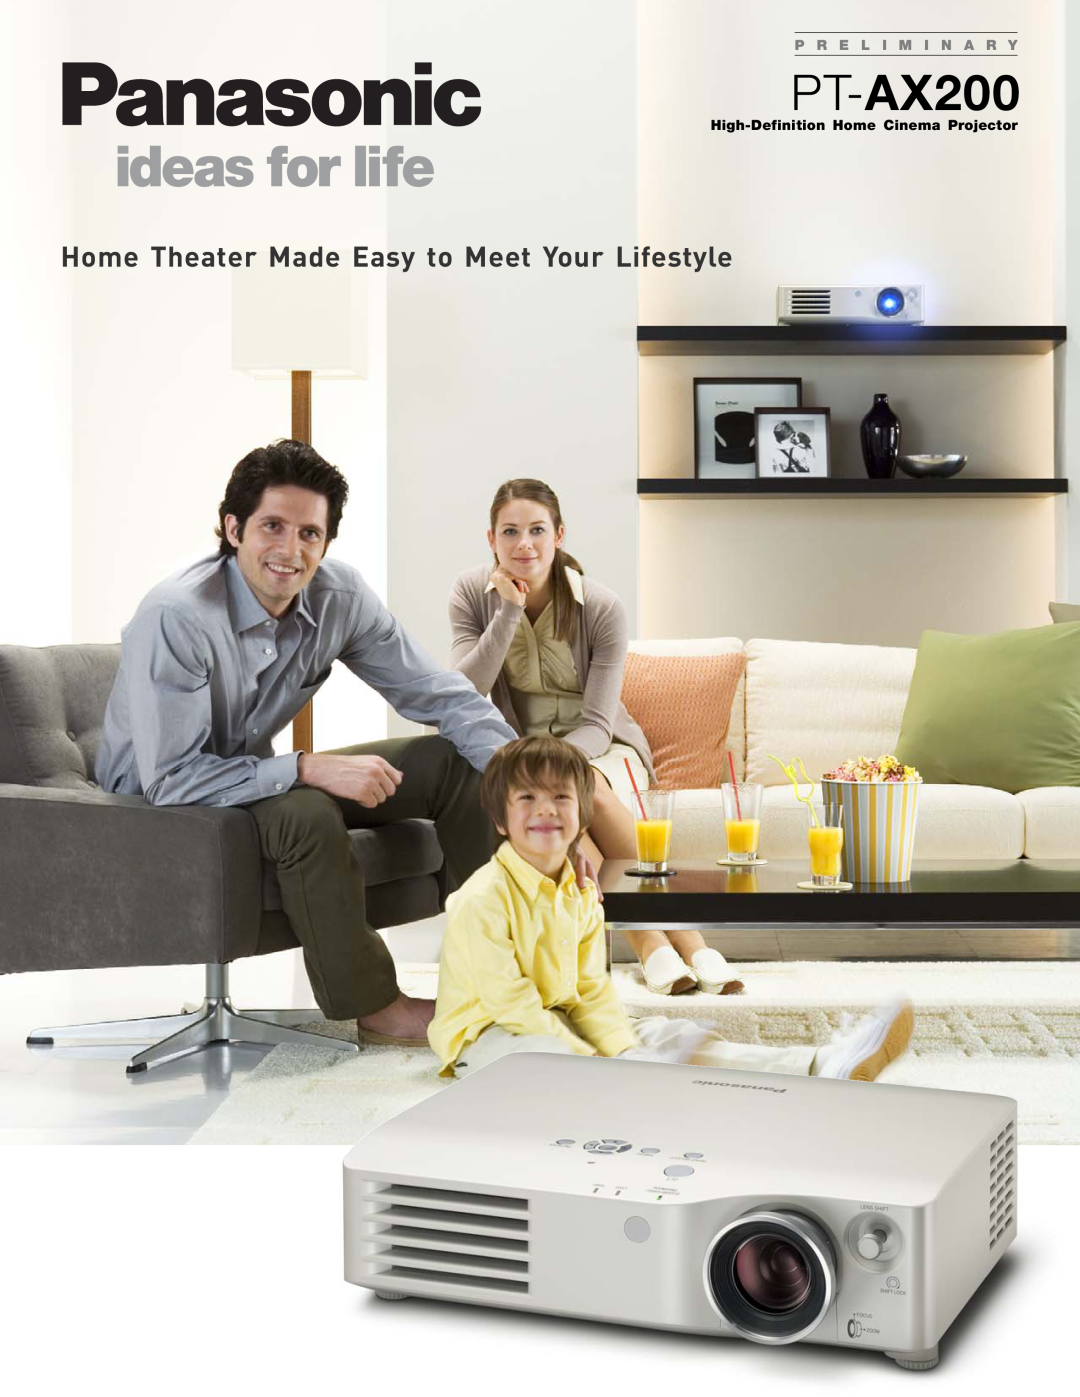 Panasonic manual PT-AX200, Home Theater Made Easy to Meet Your Lifestyle, P R E L I M I N A R Y 